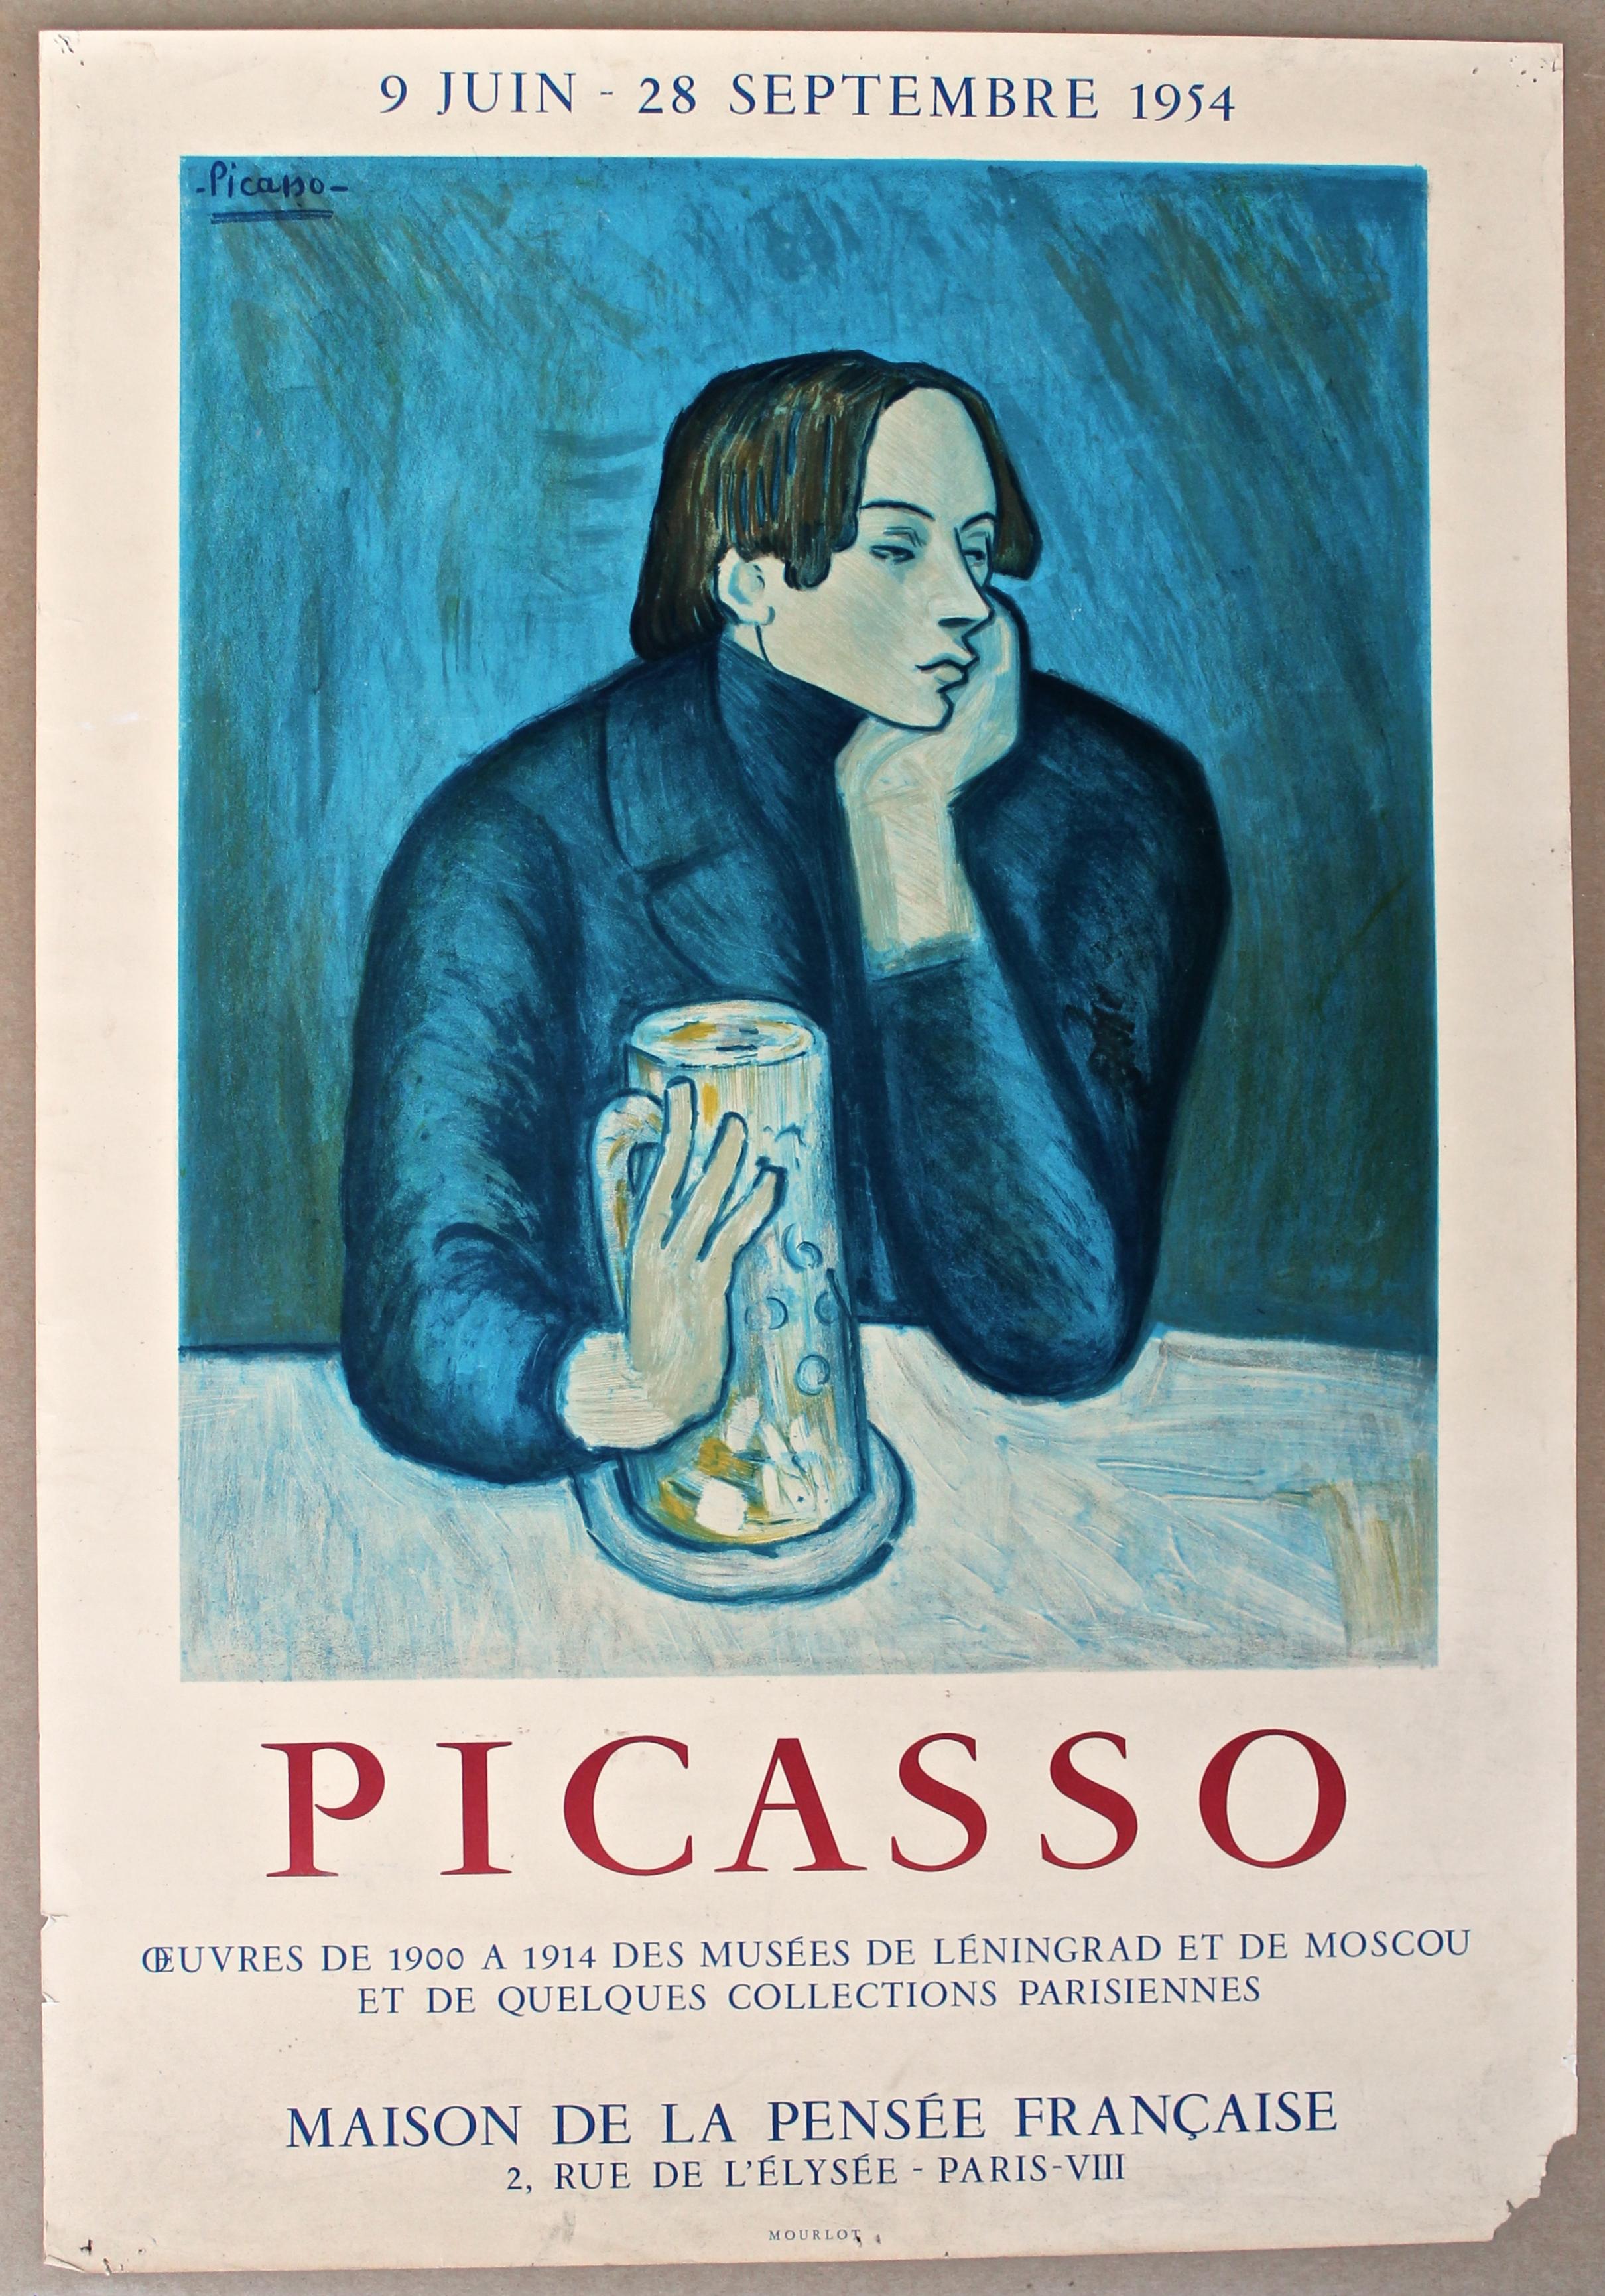 Picasso 1954 Mourlot poster reproducing one of his 'Blue Period' paintings.